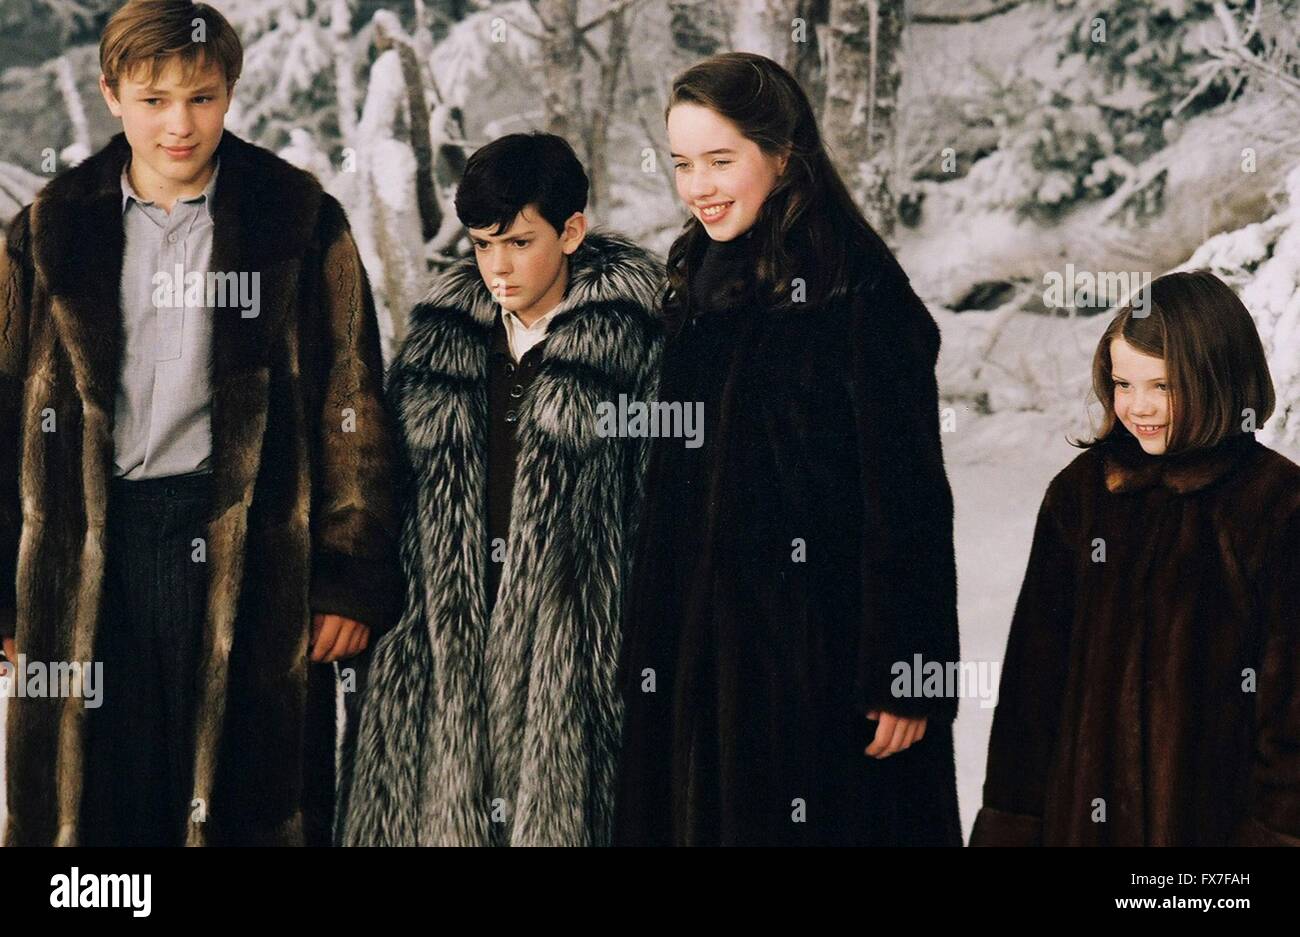 The Chronicles of Narnia: The Lion, the Witch and the Wardrobe Year: 2005 USA Georgie Henley, Anna Popplewell, Skandar Keynes, William Moseley, Director: Andrew Adamson Stock Photo